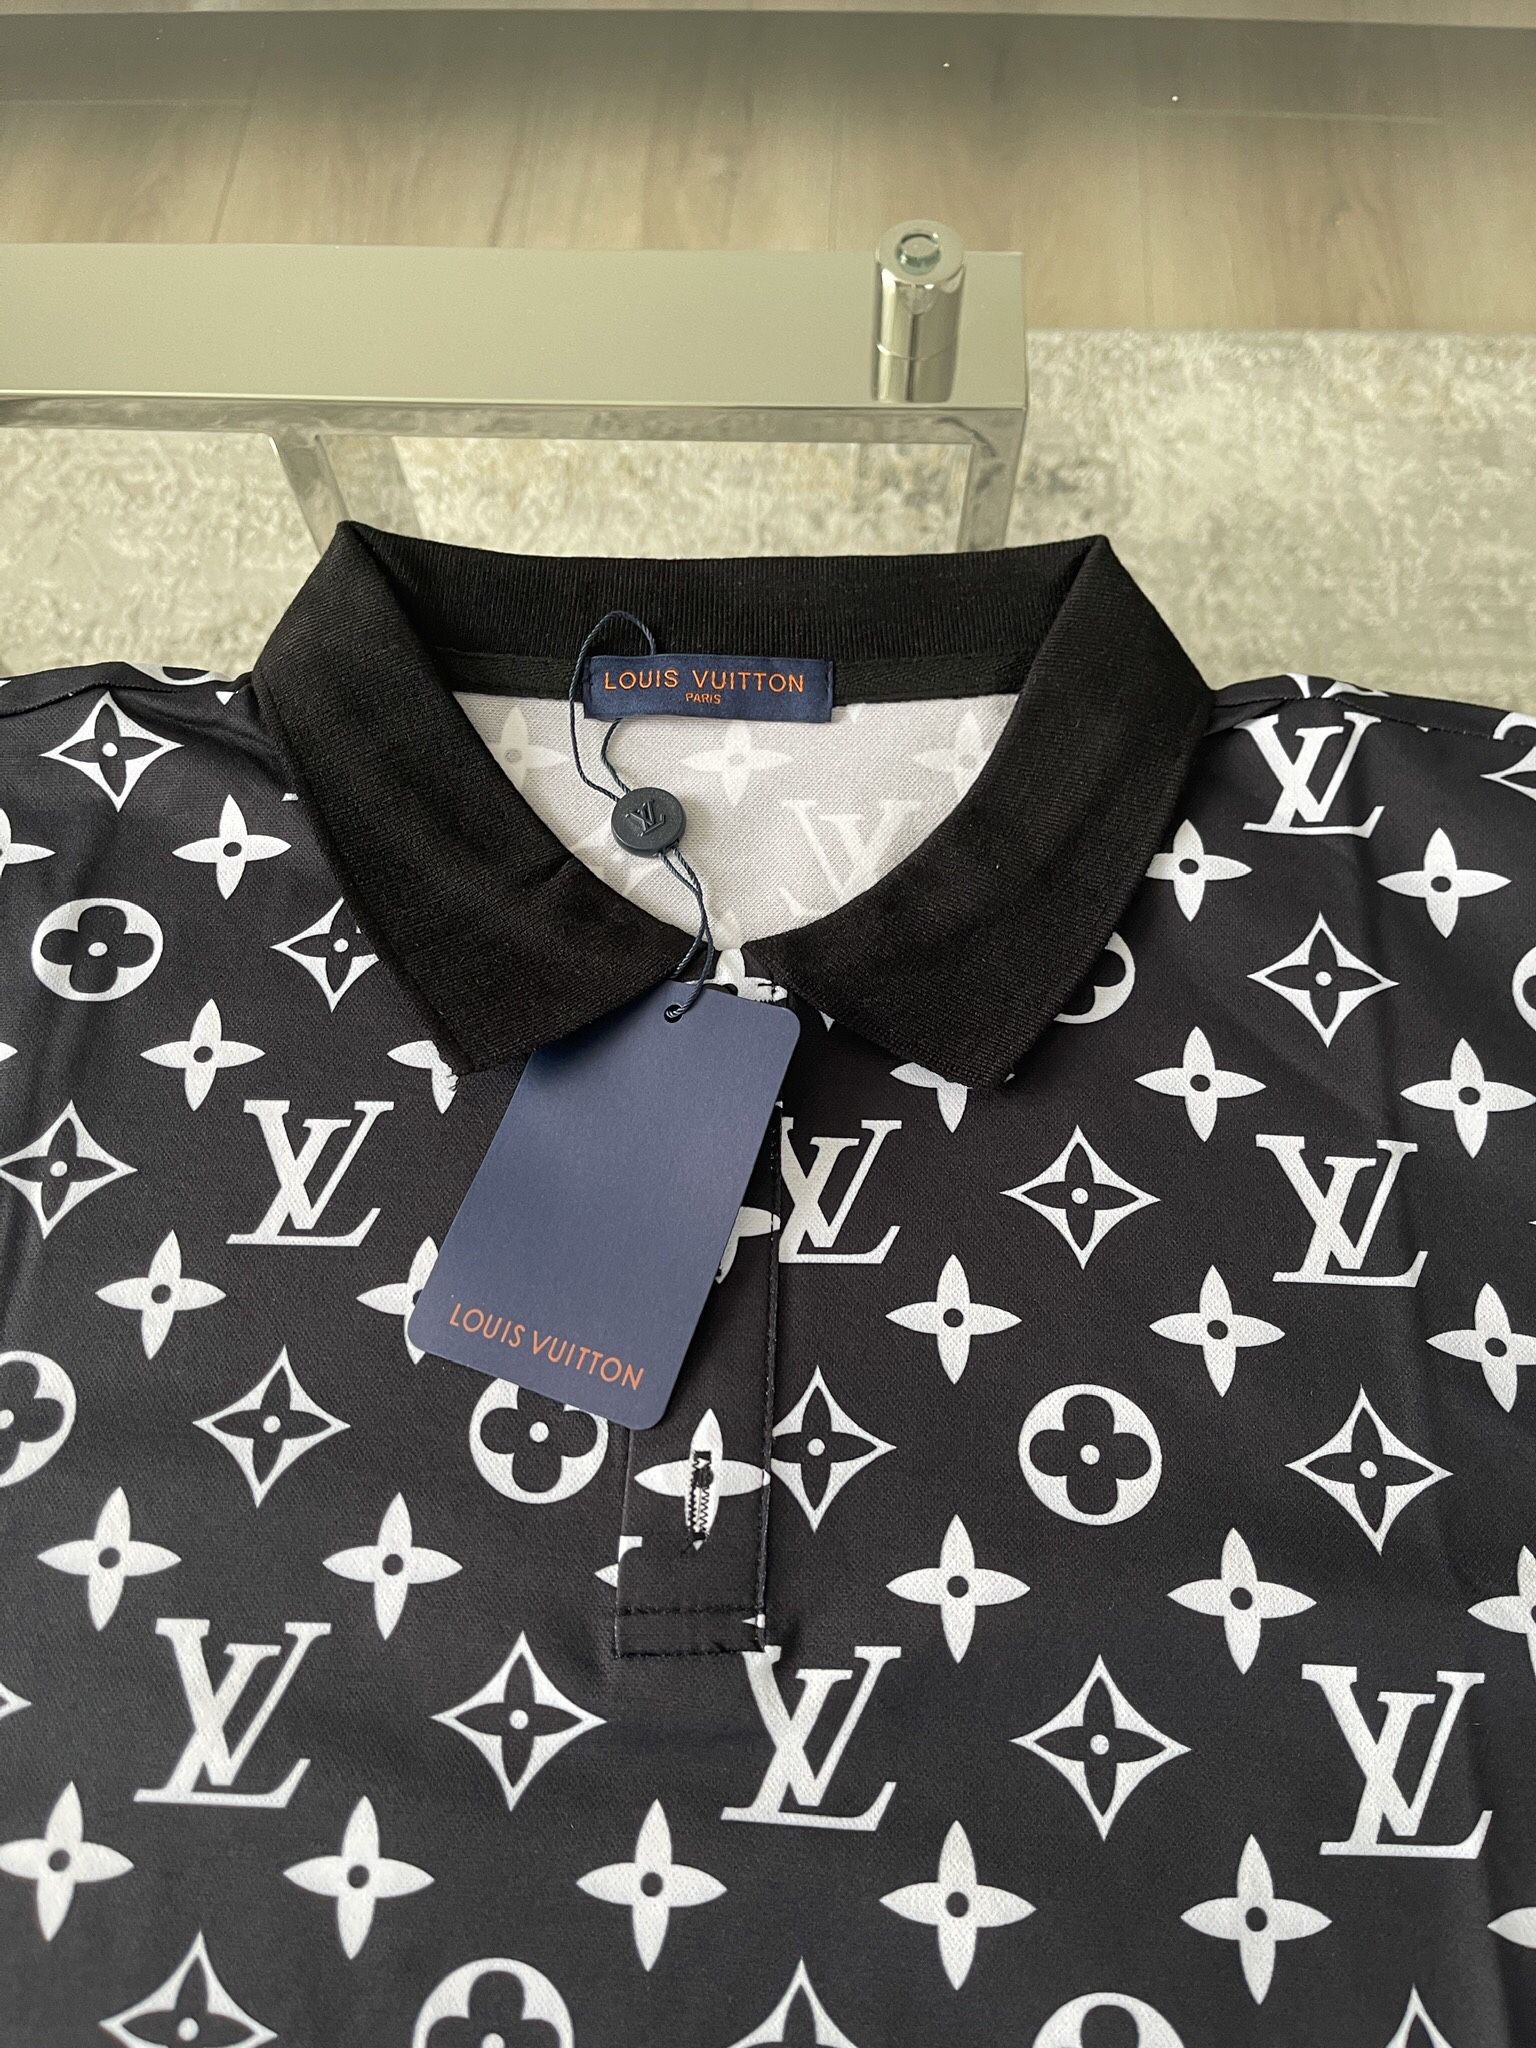 Louis Vuitton Hawaiian Shirt for Sale in Los Angeles, CA - OfferUp